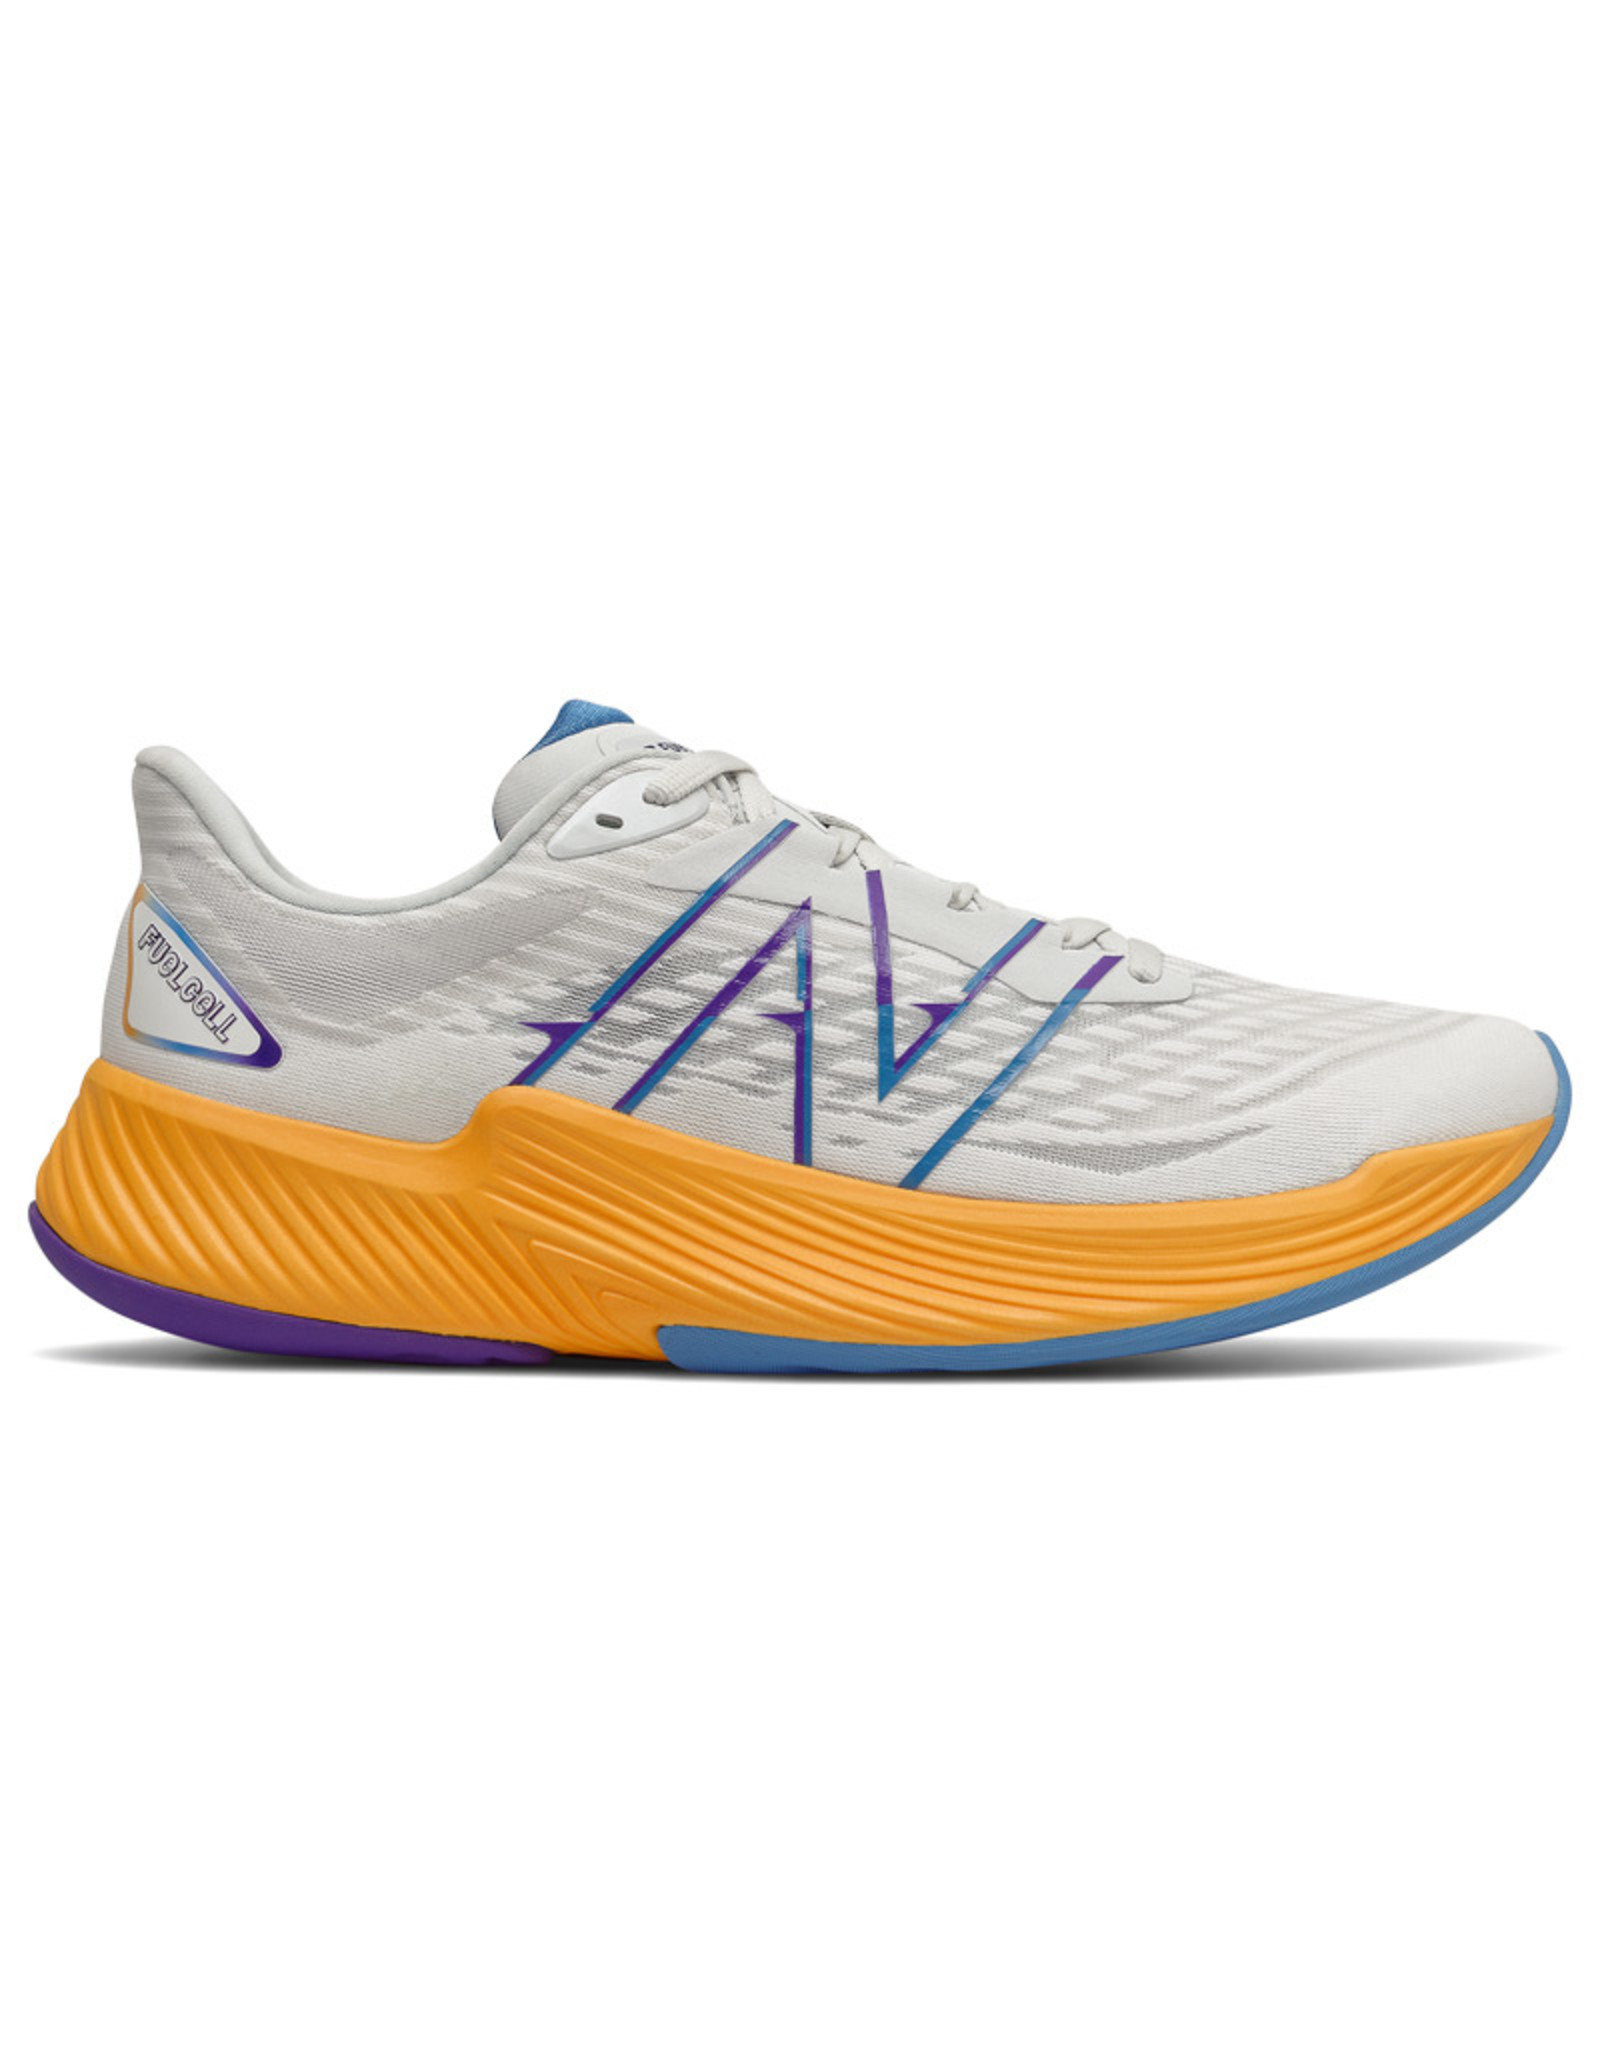 New Balance Men's Fuel Cell Prism 2 - MFCPZV2